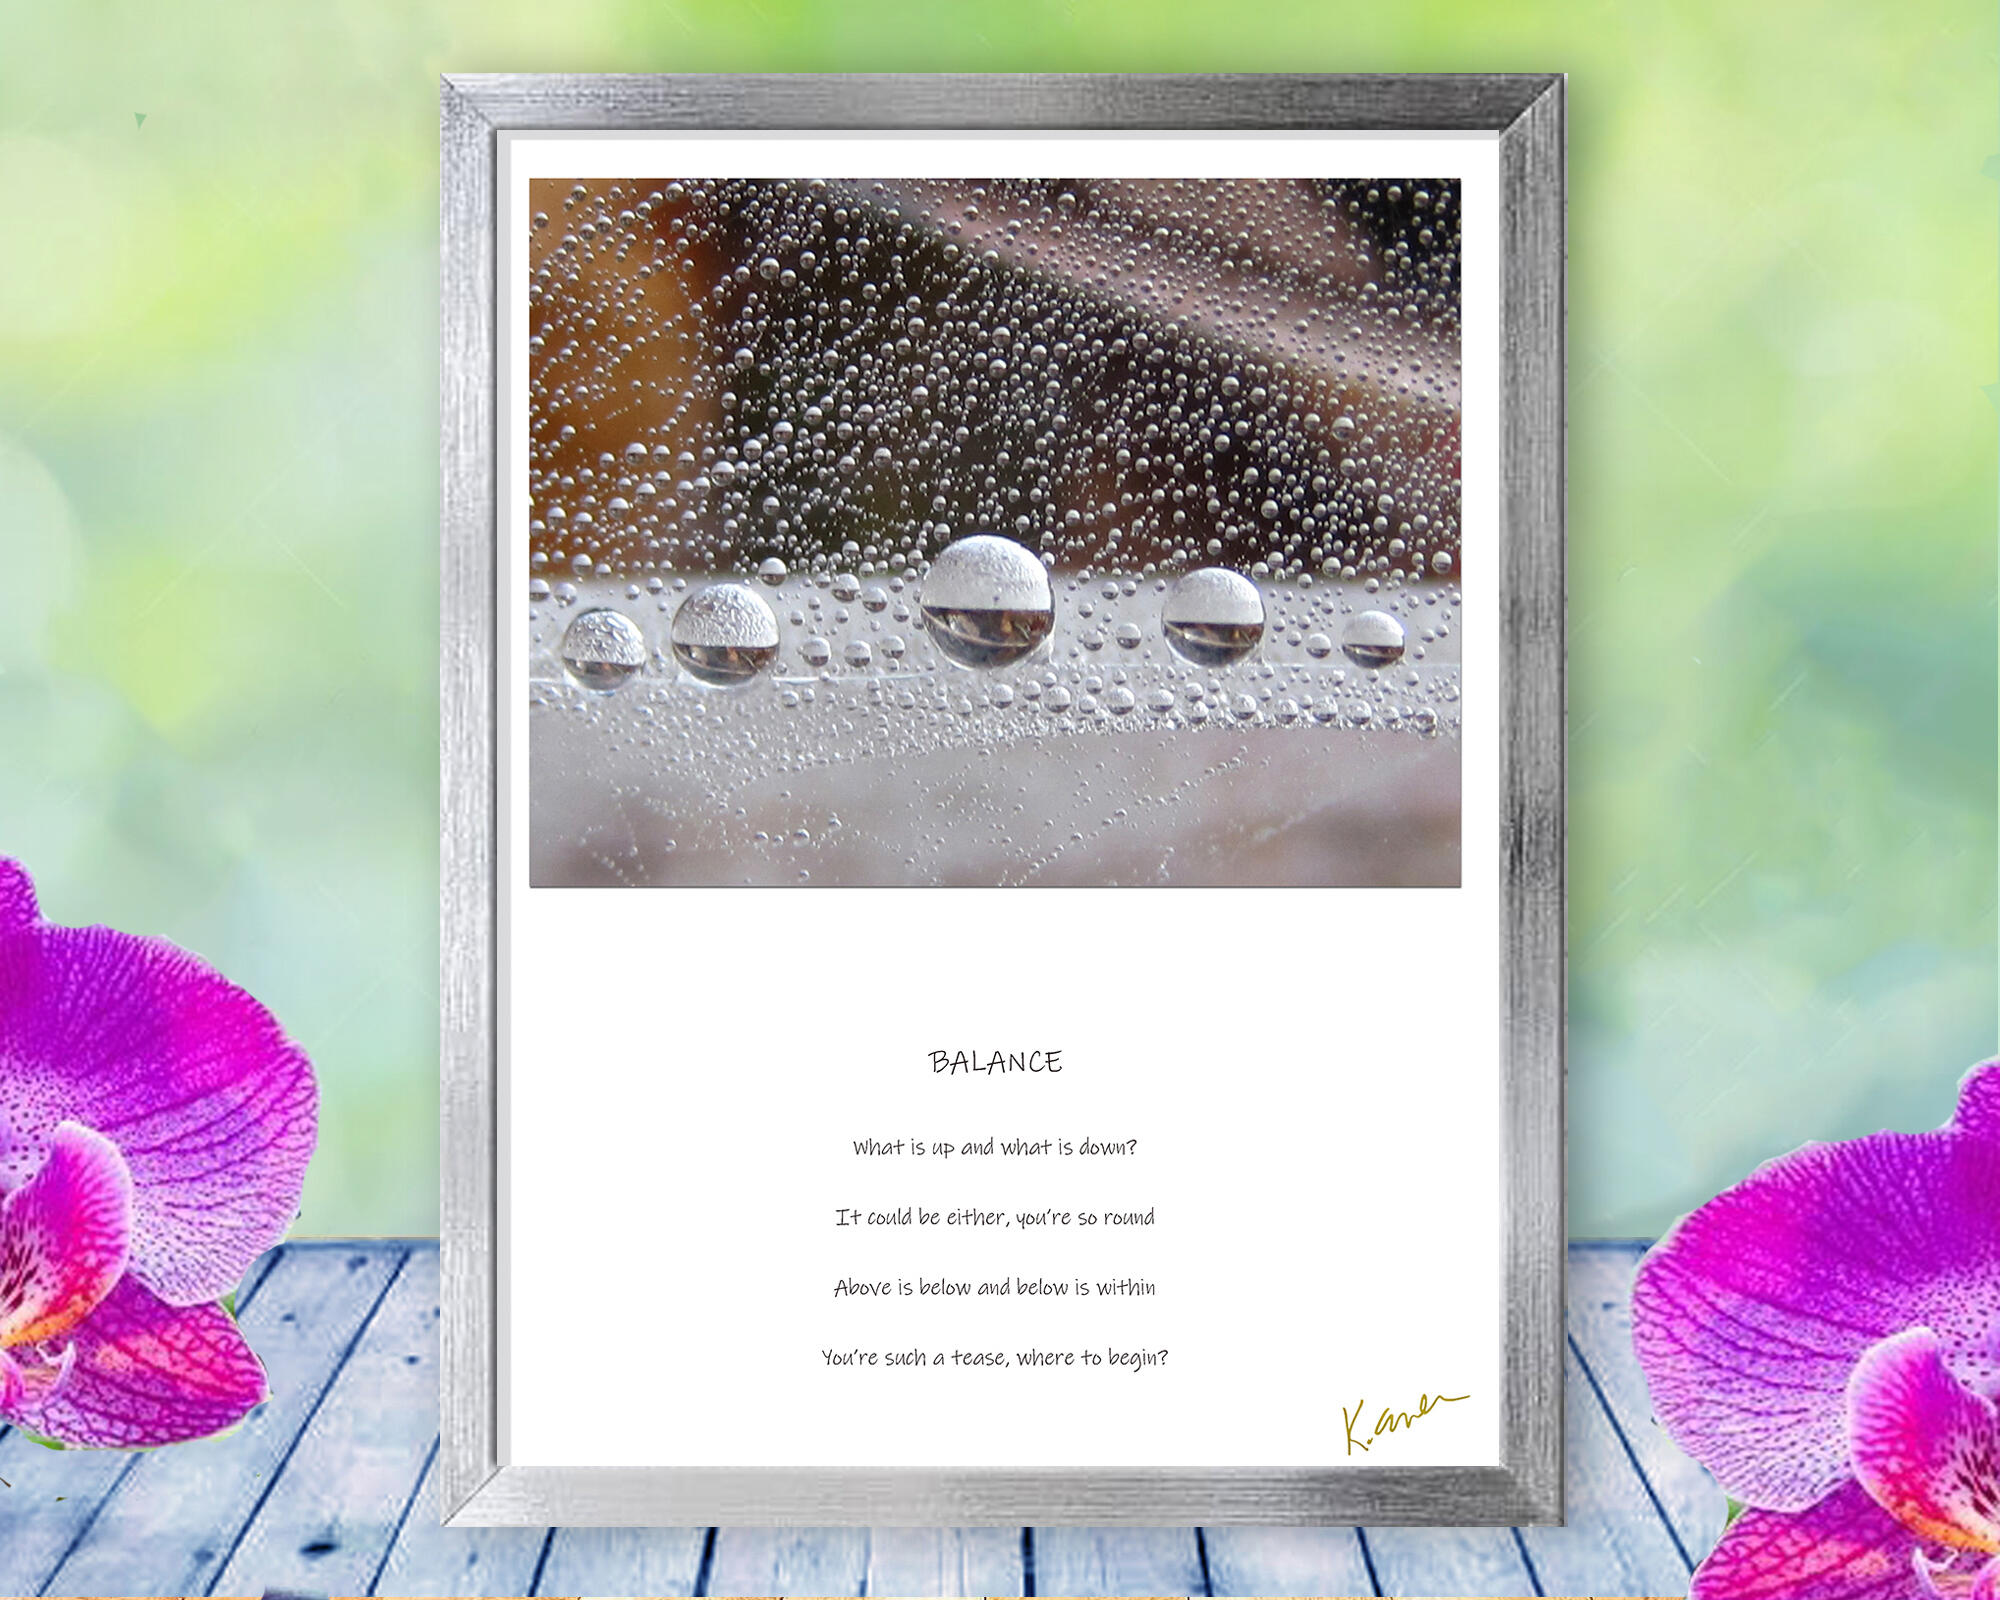 Drops of dew perfectly placed reflect a Yin Yang balance in this mesmerizing, beautiful, nature print with poem - Balance-by The Poetry of NatureDrops of dew perfectly placed reflect a Yin Yang balance in this mesmerizing, beautiful, nature print with poem - Balance-by The Poetry of NatureDrops of dew perfectly placed reflect a Yin Yang balance in this mesmerizing, beautiful, nature print with poem - Balance-by The Poetry of Nature